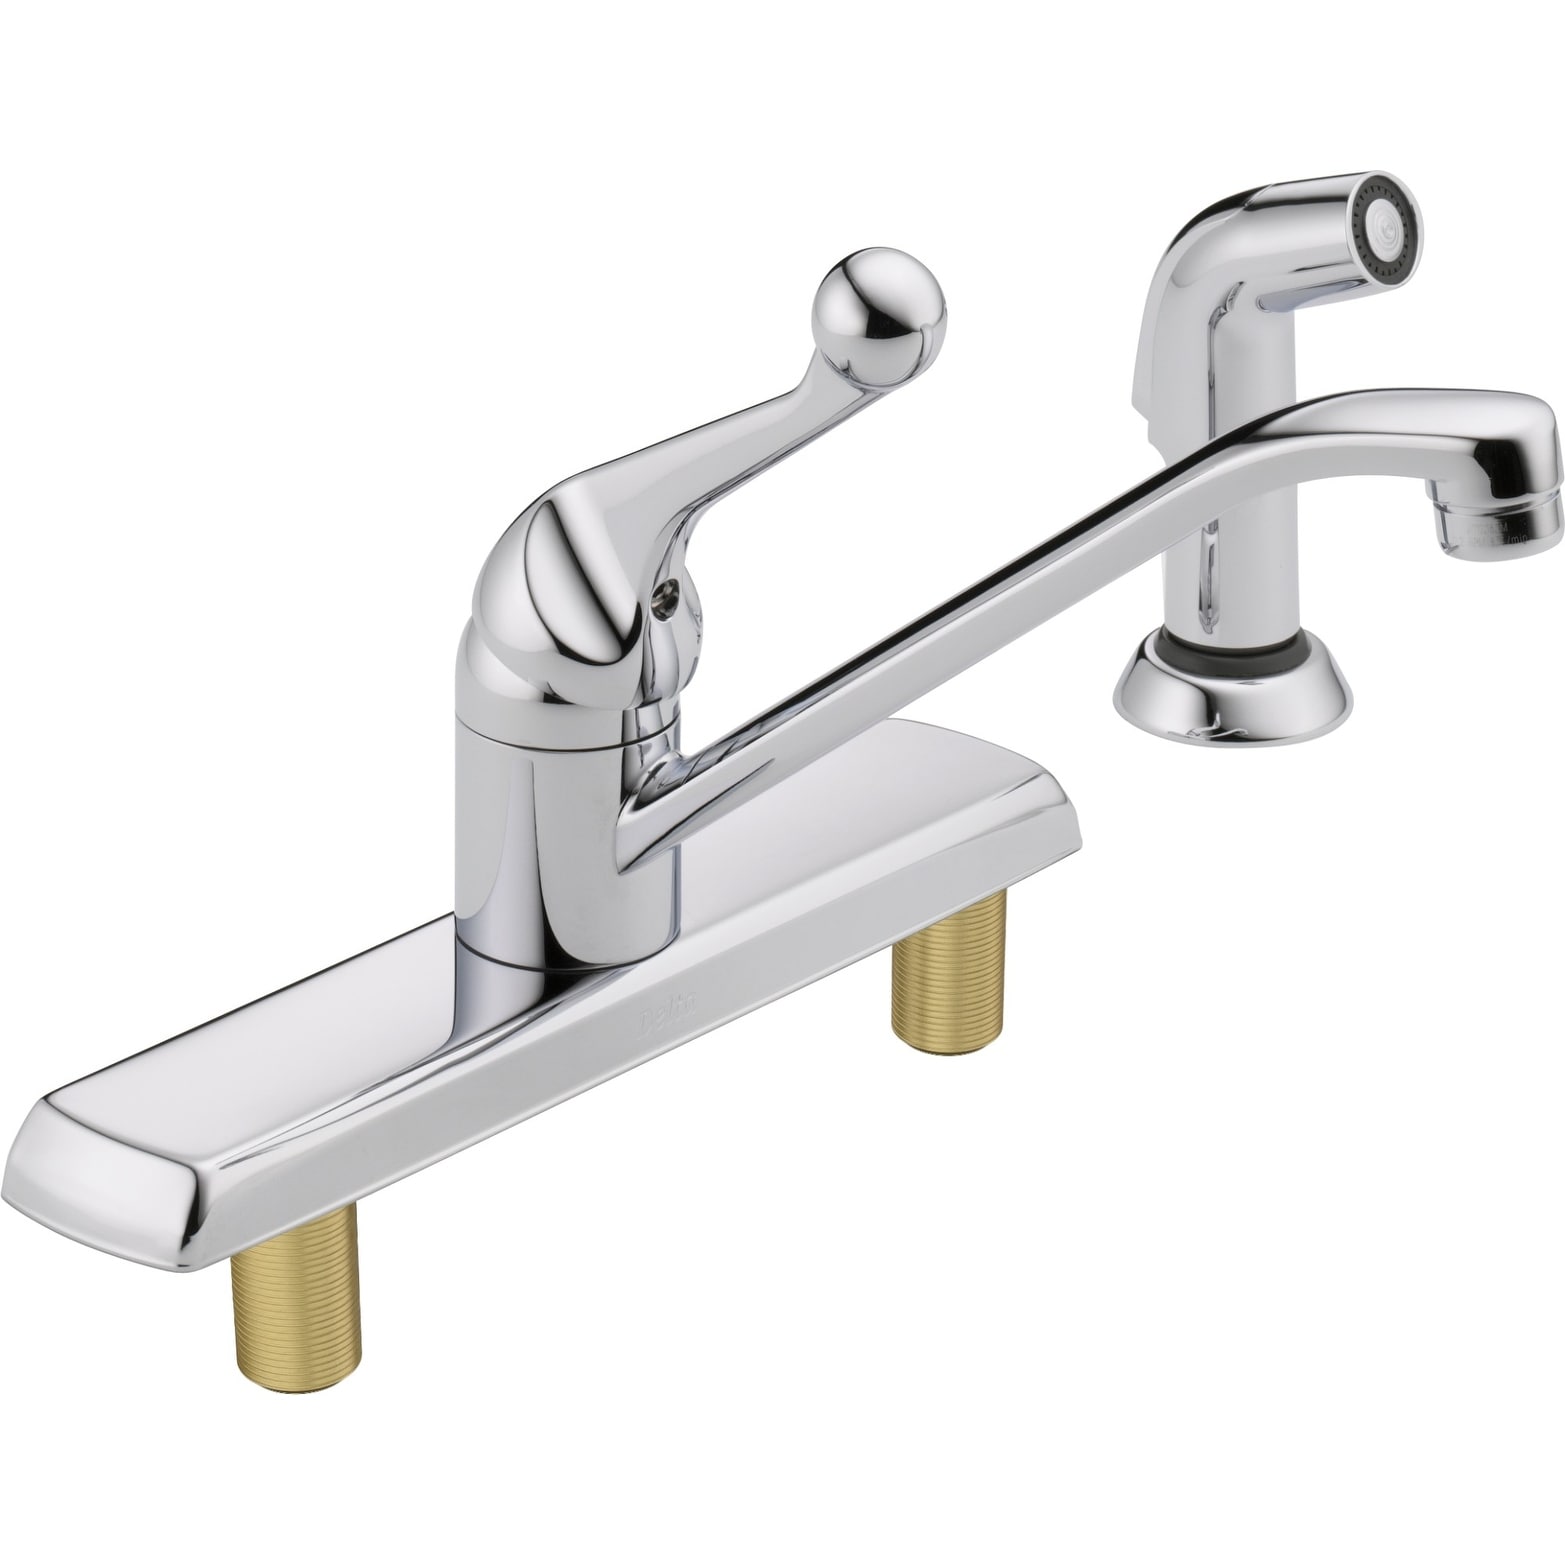 Shop Black Friday Deals On Delta 420 Classic Kitchen Faucet With Side Spray Chrome Overstock 16322459